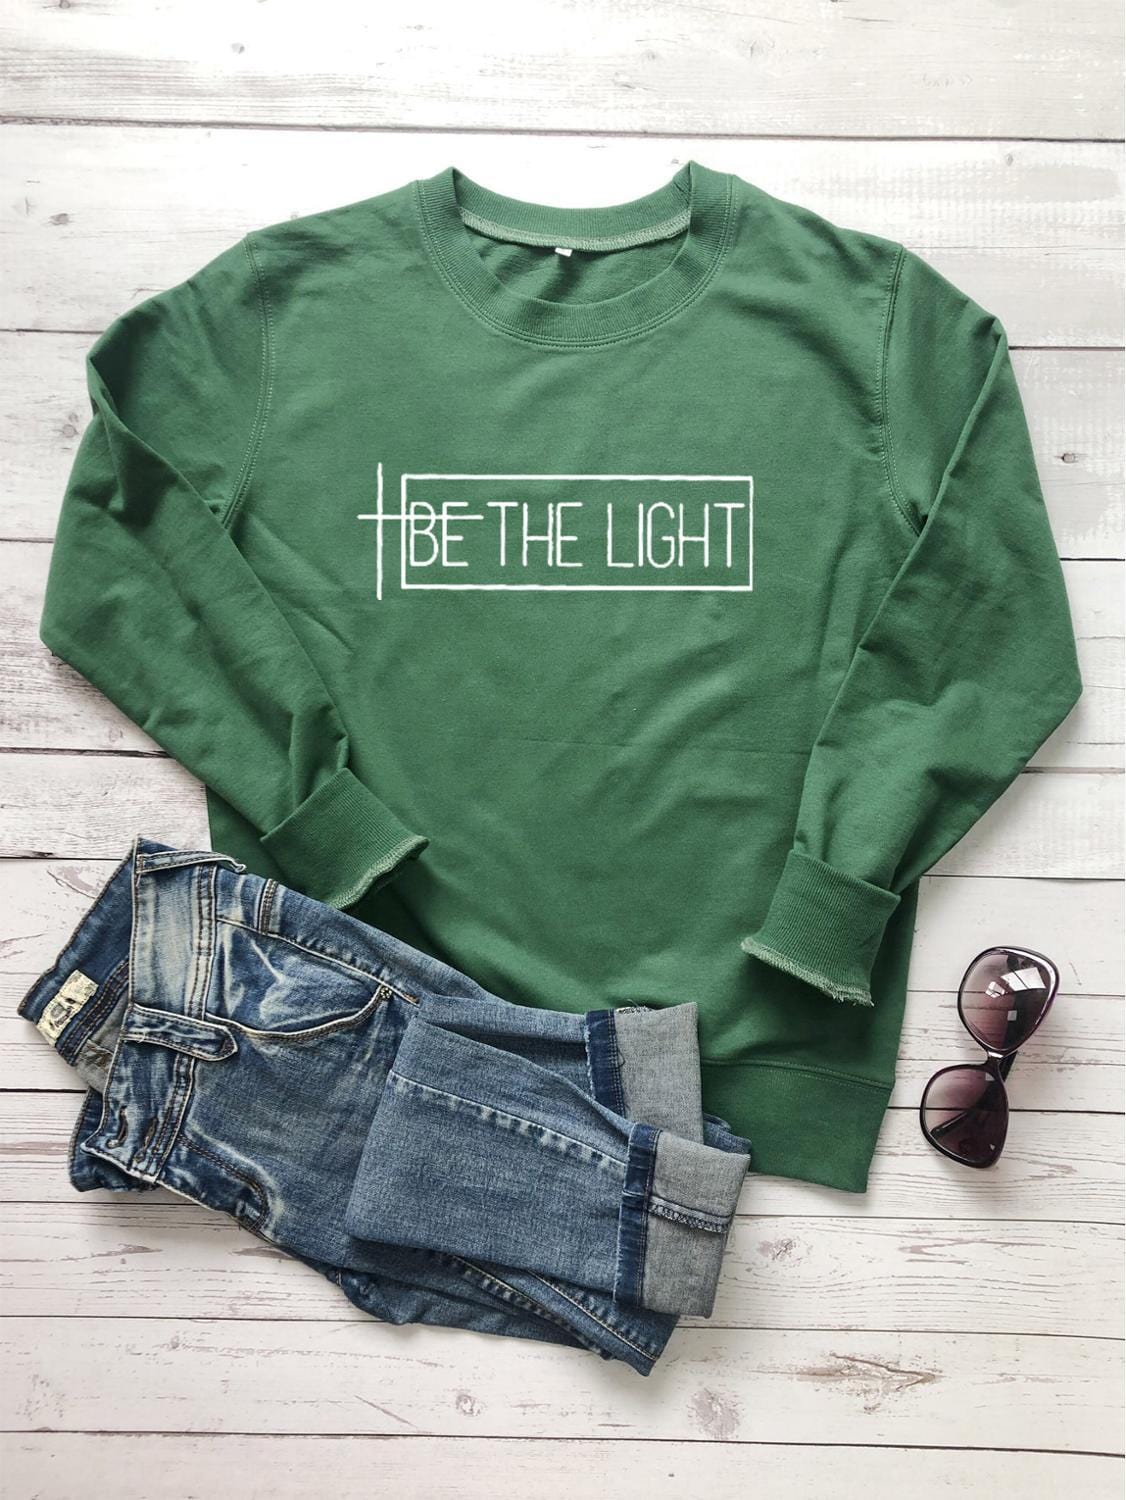 Be the light Sweatshirt women religion Christian Bible baptism sweatshirts slogan quote party hipster pullovers tops